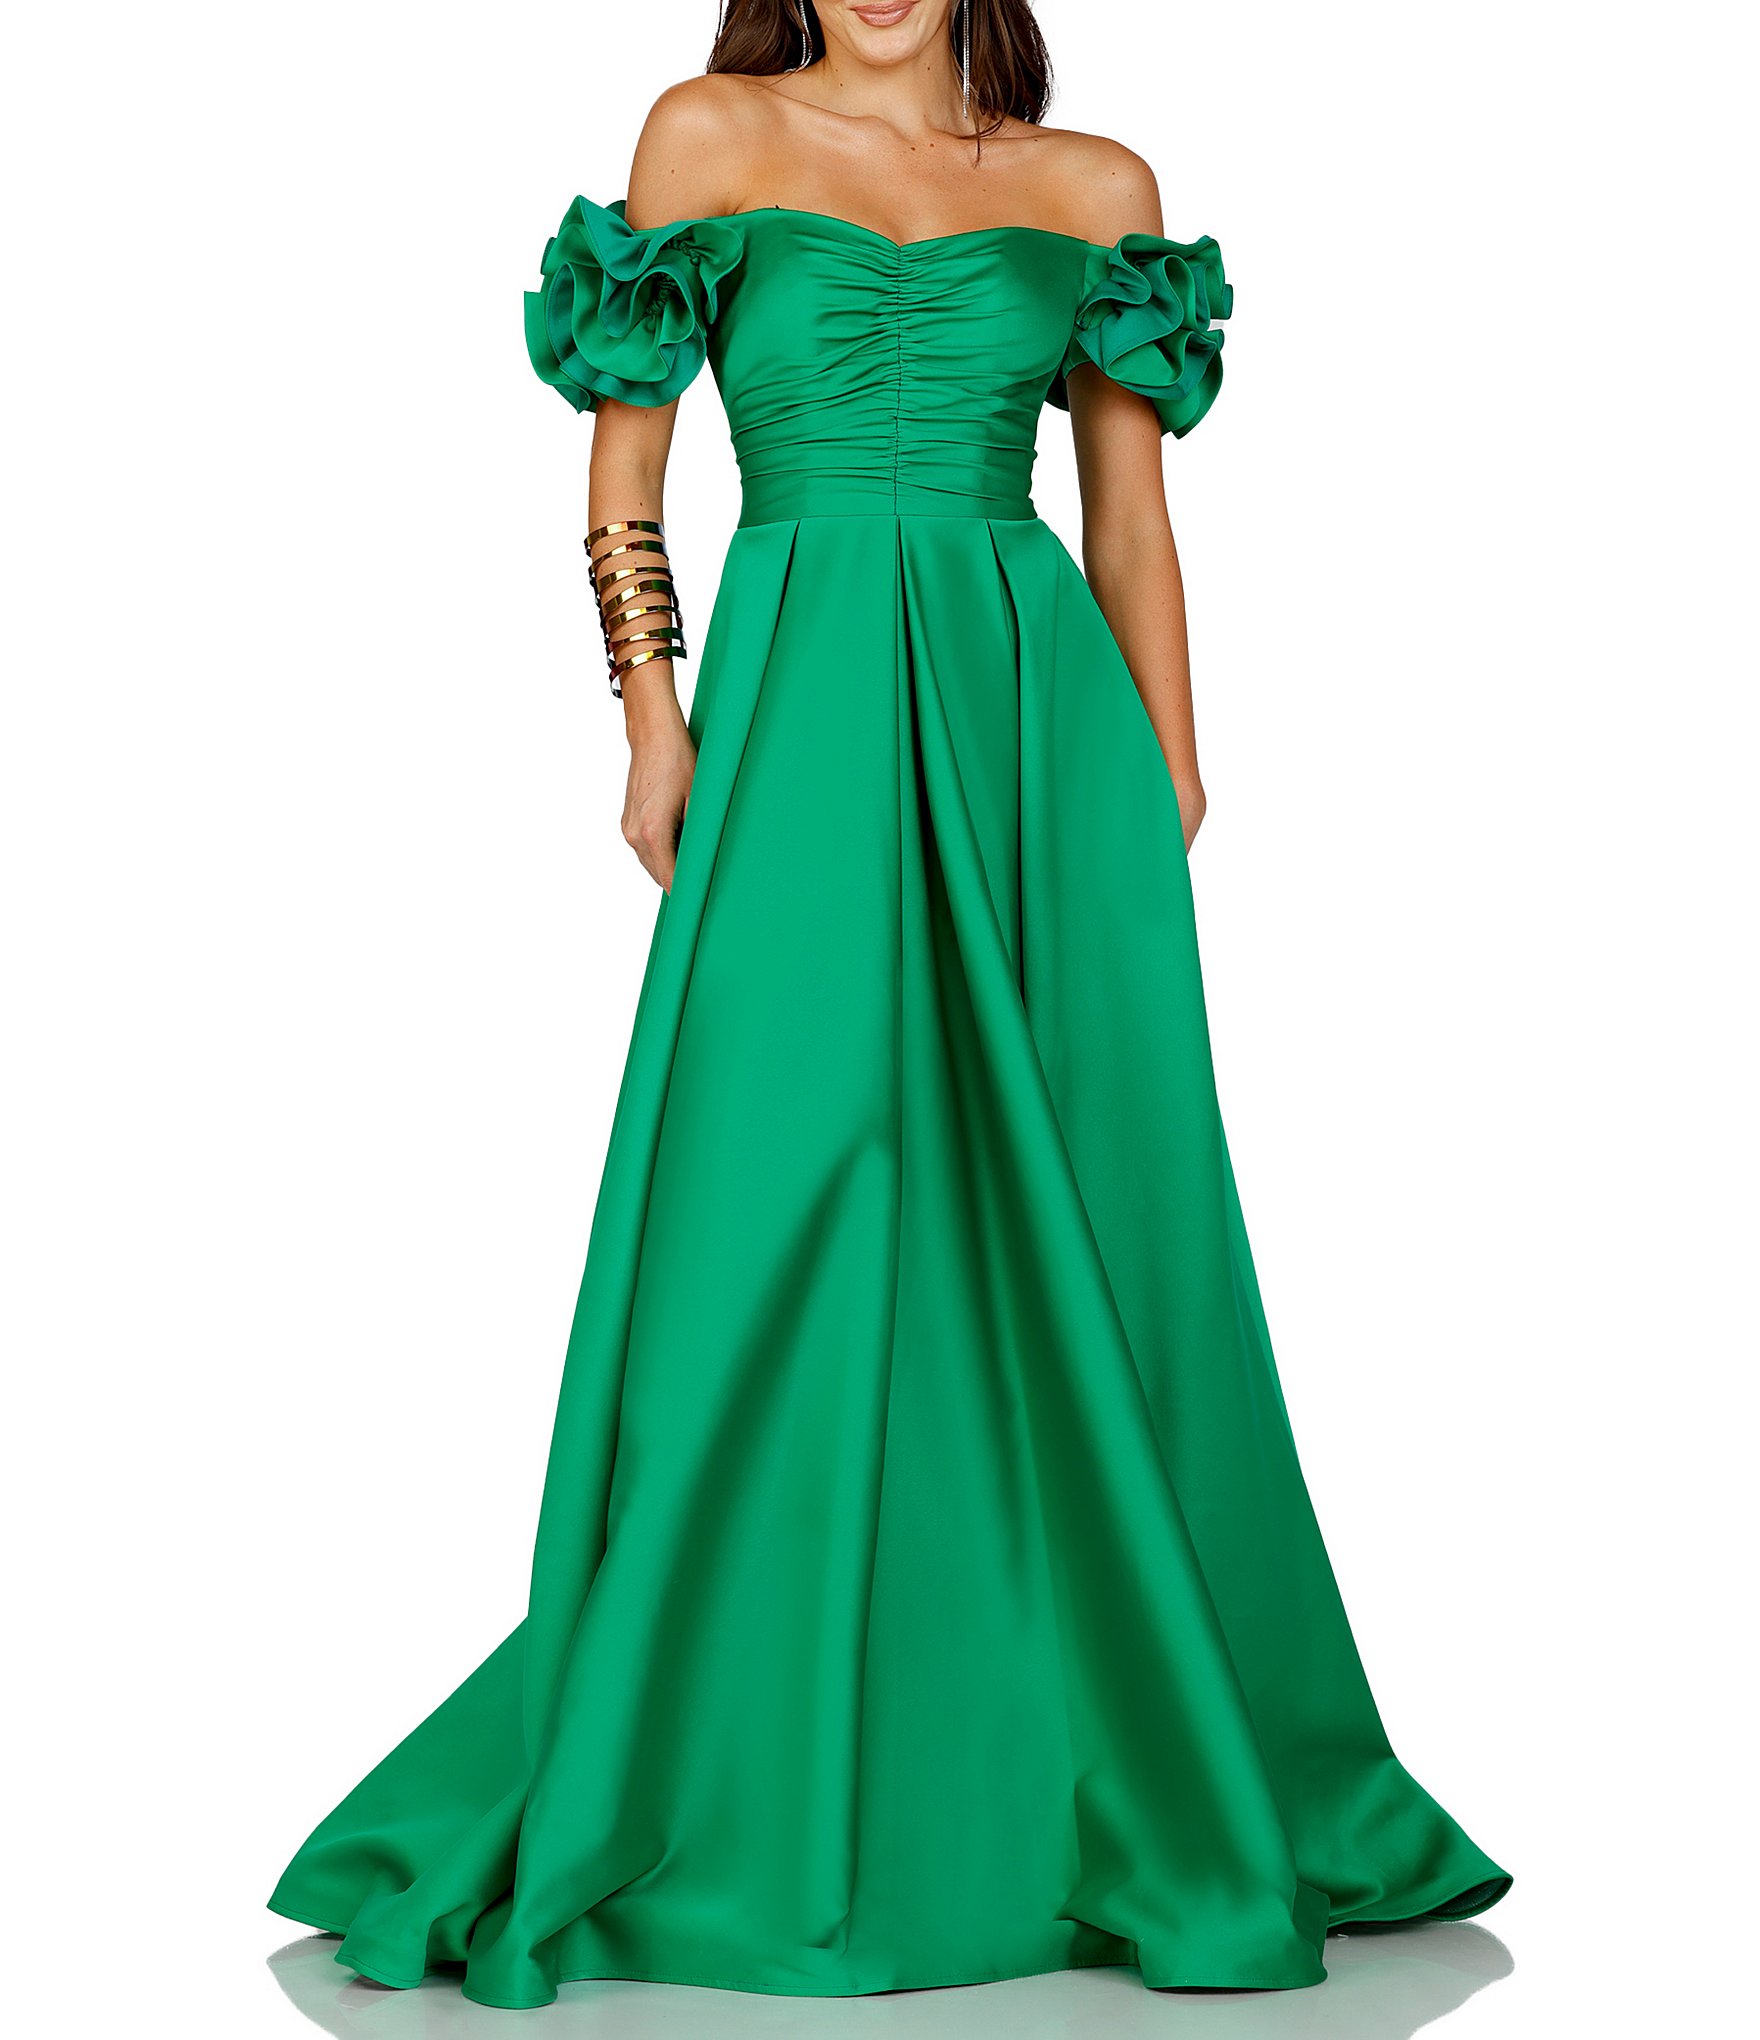 Terani Couture Ruffled Off-the-Shoulder Ruched Bodice Ball Gown | Dillard's